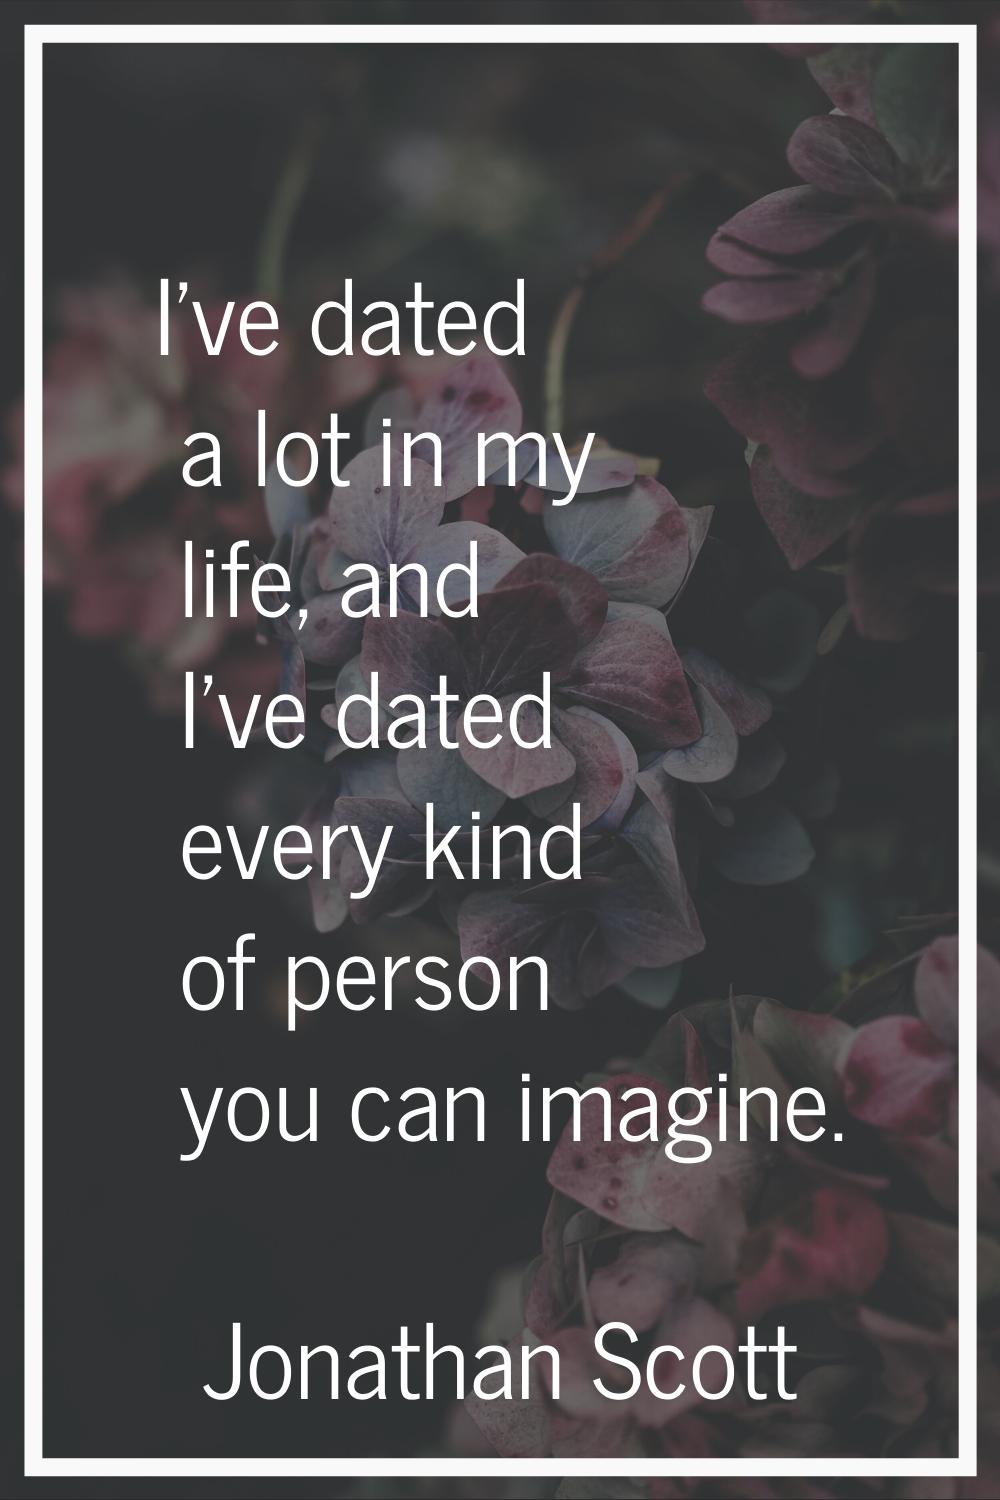 I've dated a lot in my life, and I've dated every kind of person you can imagine.